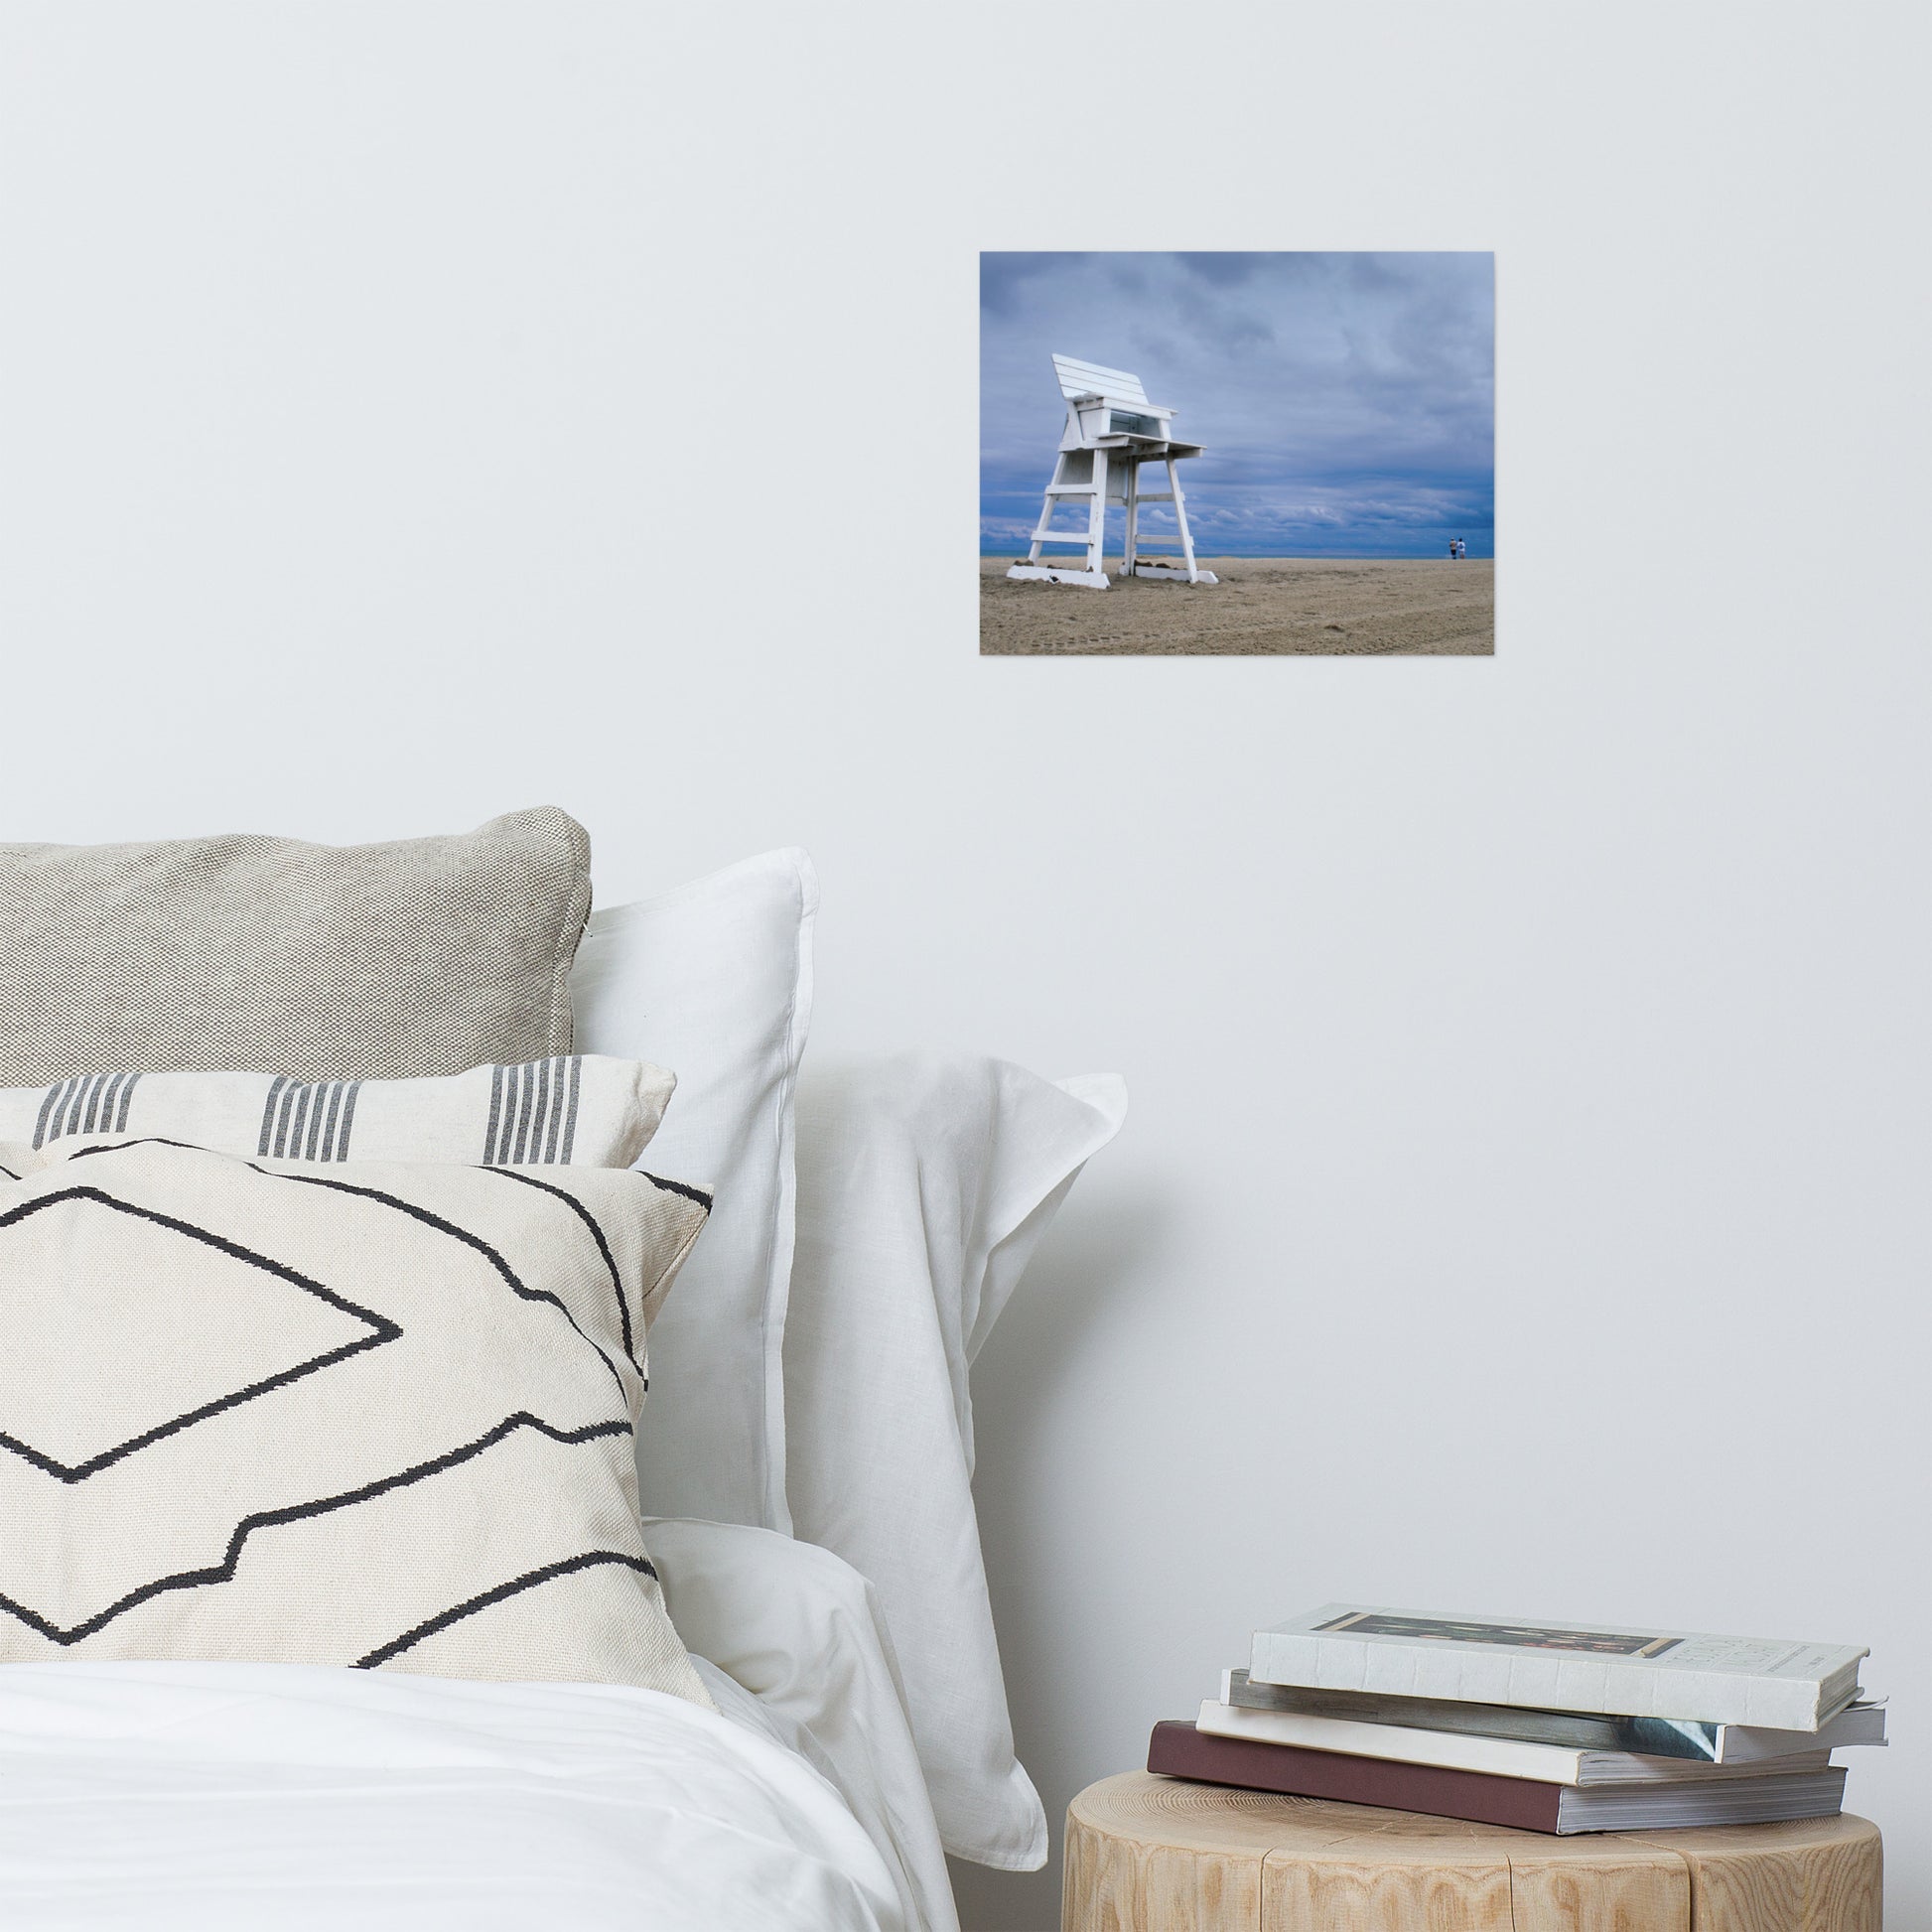 Bed With Pictures Above: Stormy Skies - Beach / Coastal / Seascape Nature / Landscape Photograph Loose / Unframed Wall Art Print - Artwork